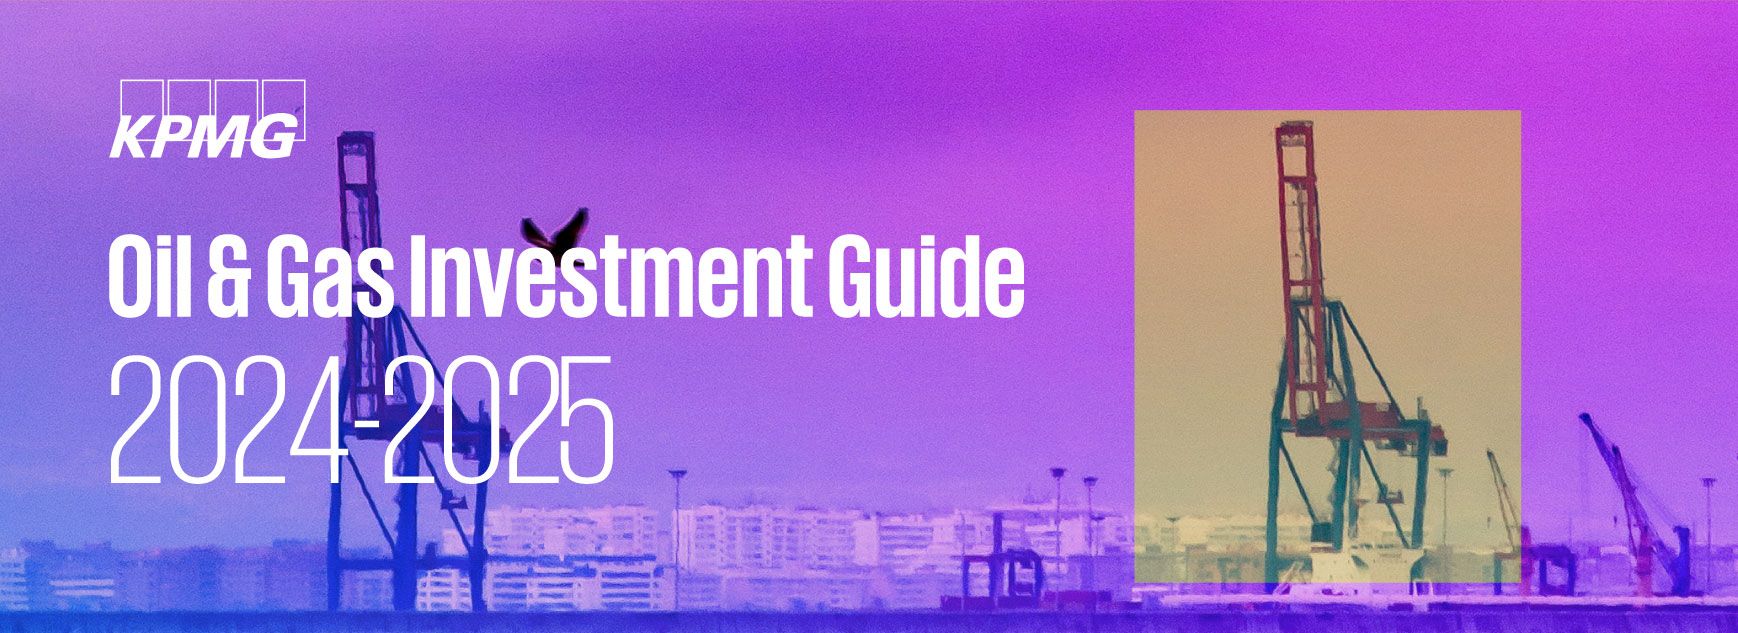 Oil & Gas Investment Guide 2024-2025